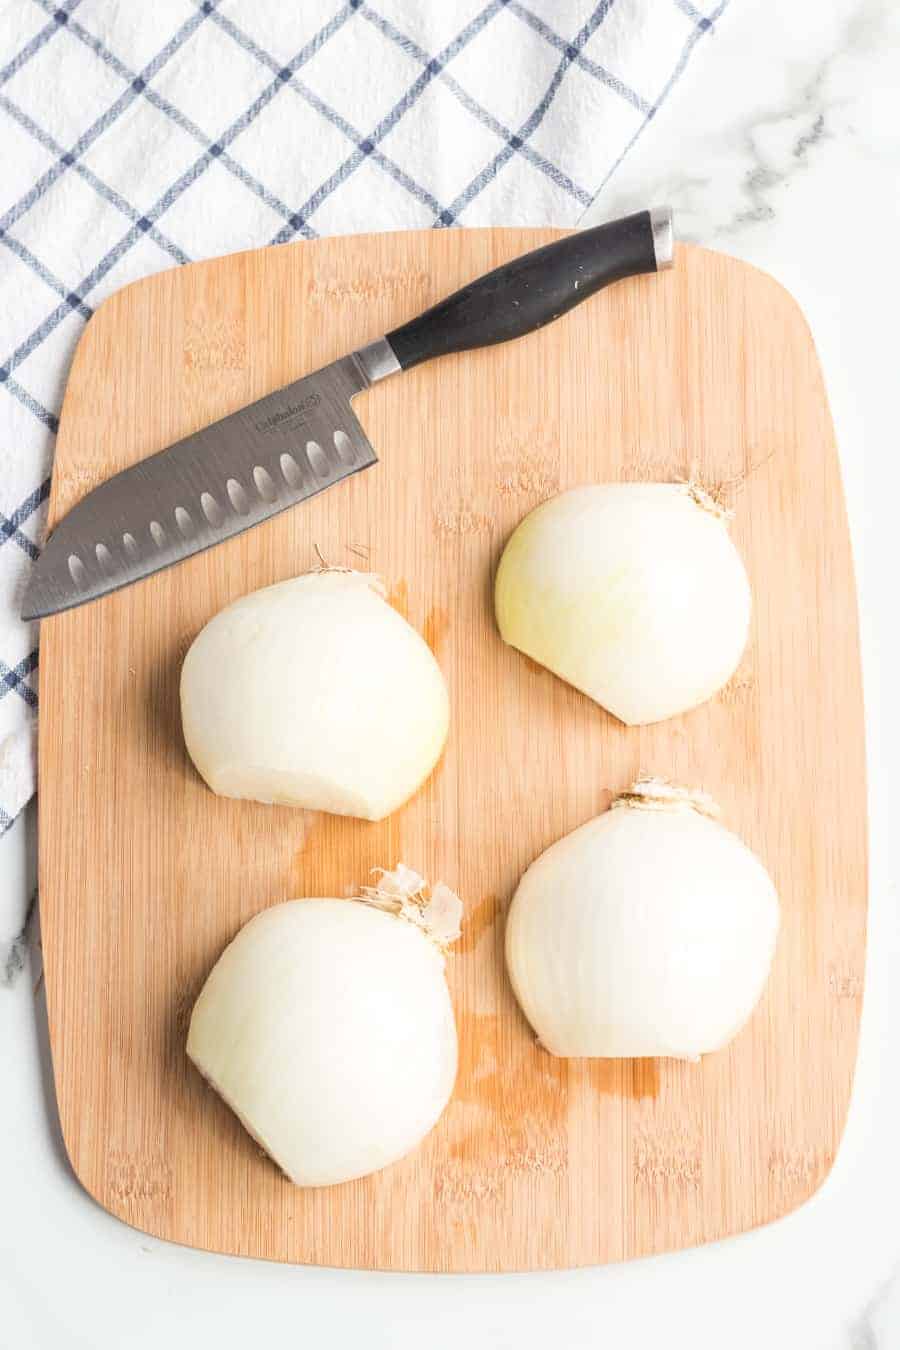 Caramelized onions are sweet, creamy, and luxurious to the palate. The low and slow cooking method cuts any of that tangy, sharp flavor that raw onions are so well known for, making these the perfect addition to just about any entree!